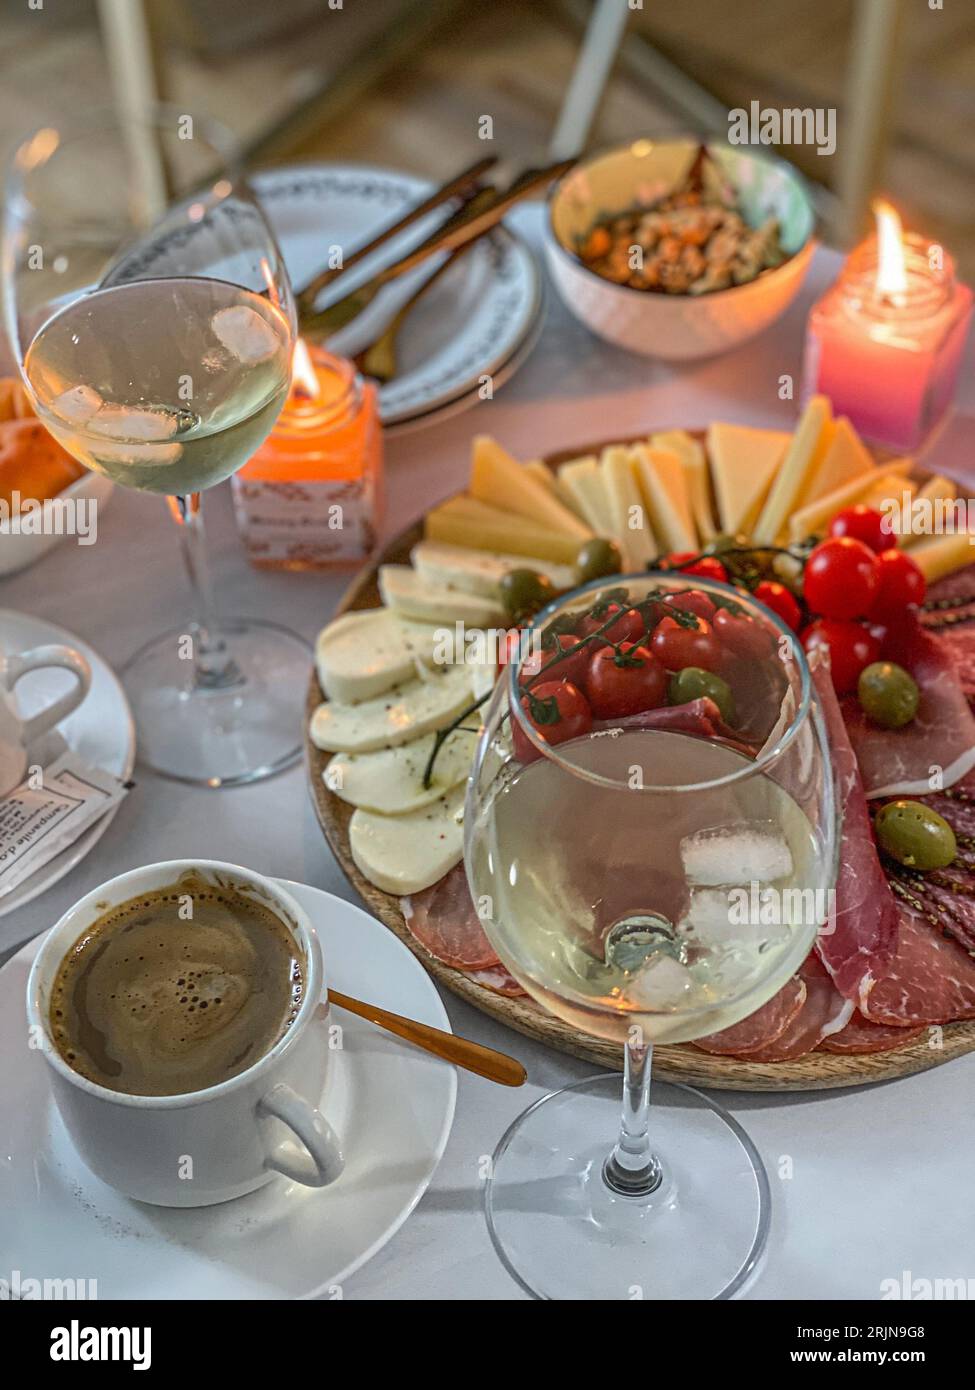 A wooden tabletop with two bottles of white wine and an array of cured meats, cheeses, and crackers Stock Photo